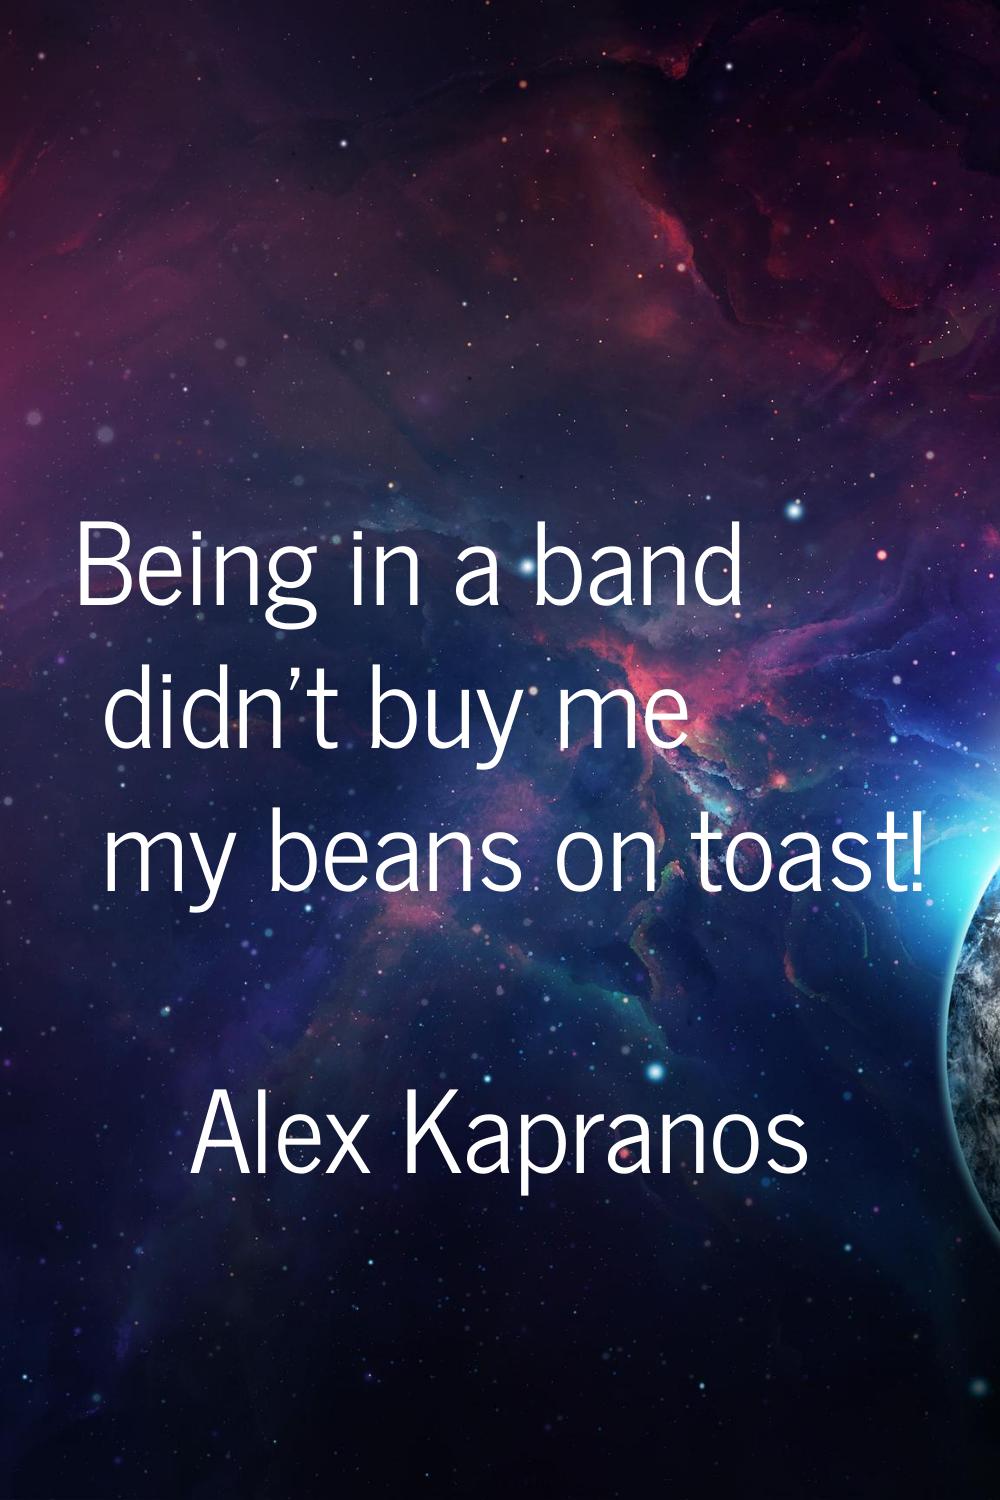 Being in a band didn't buy me my beans on toast!